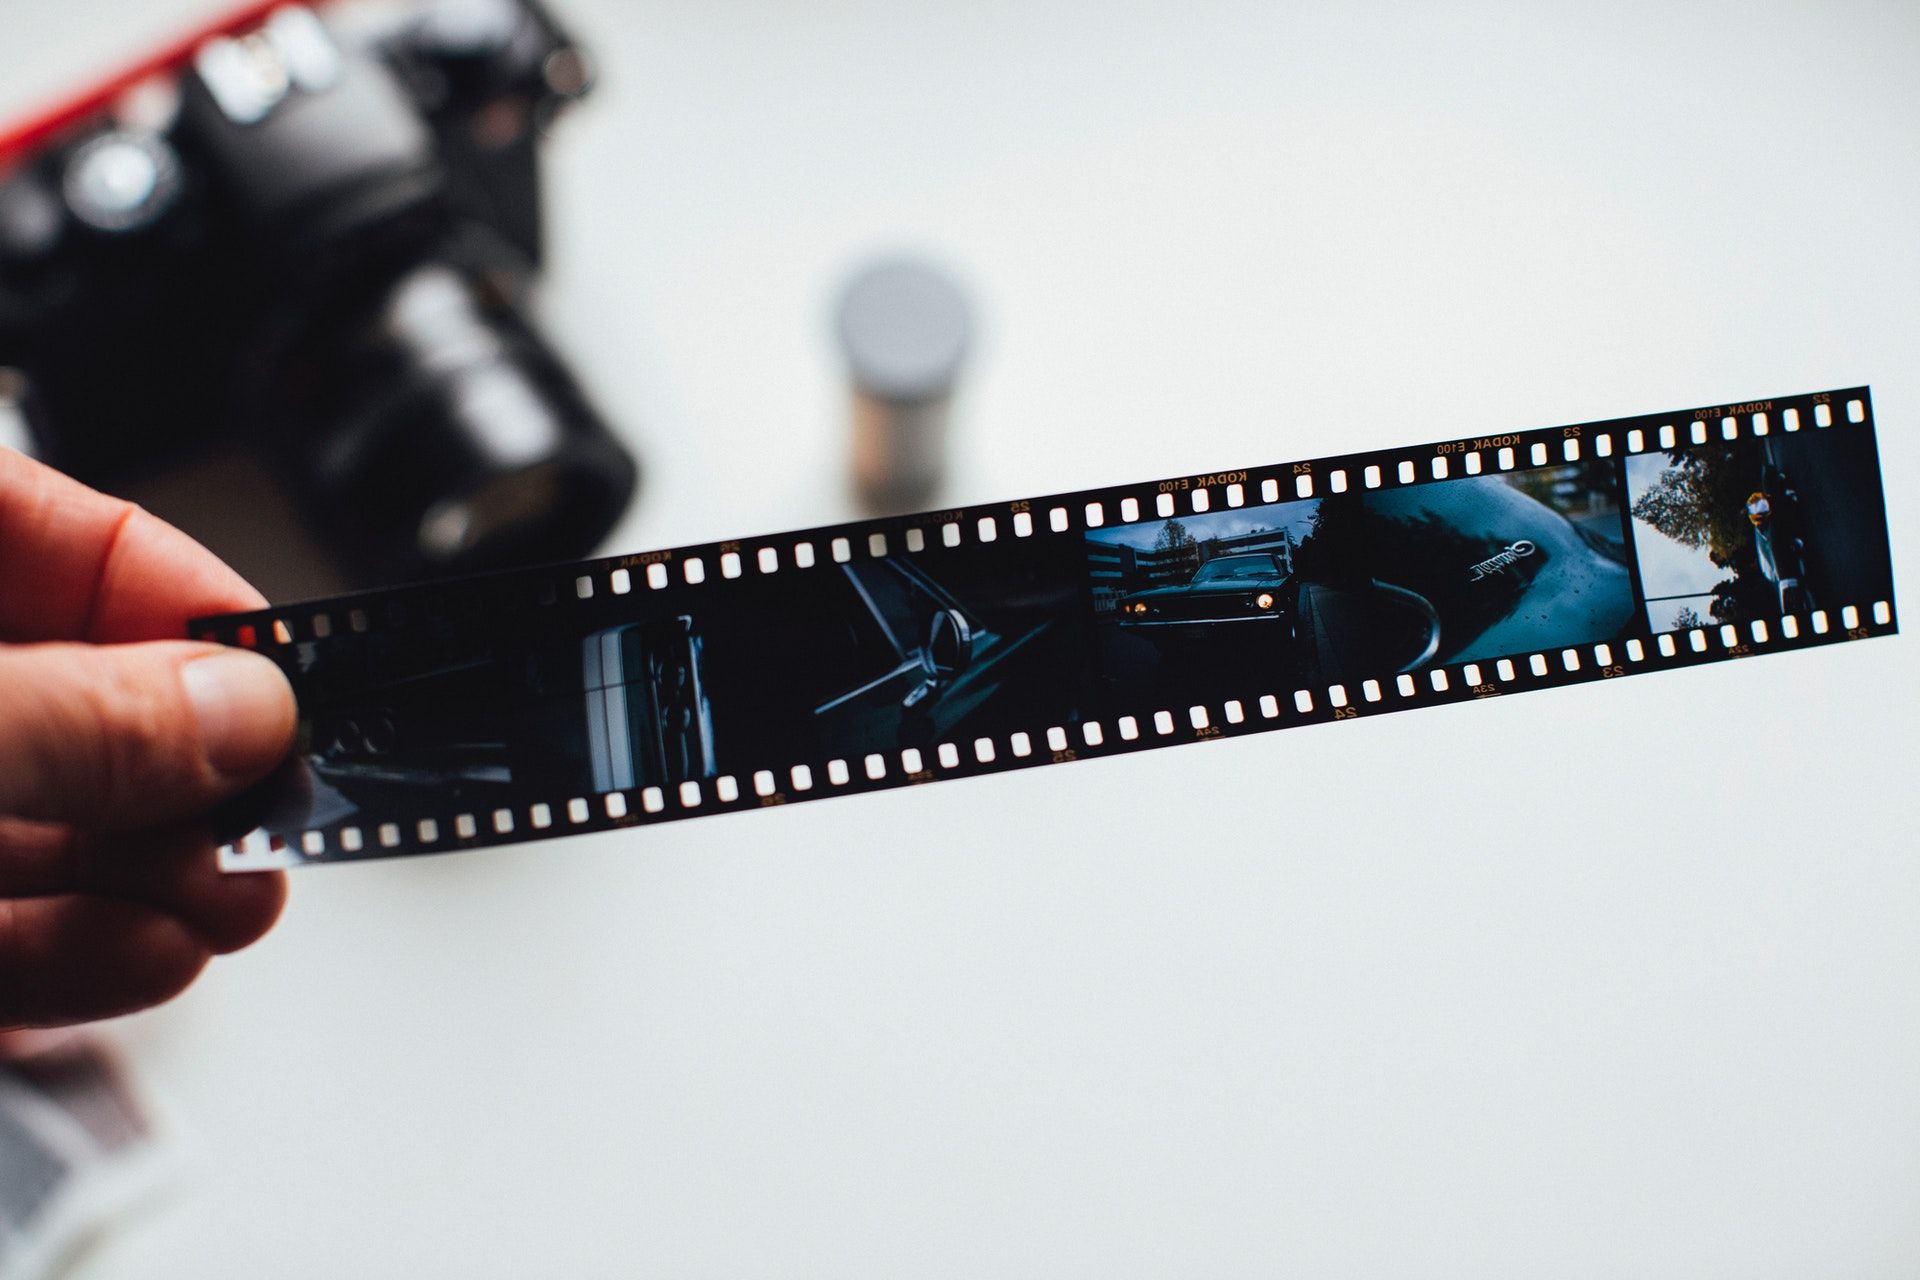 A strip of camera film showing images